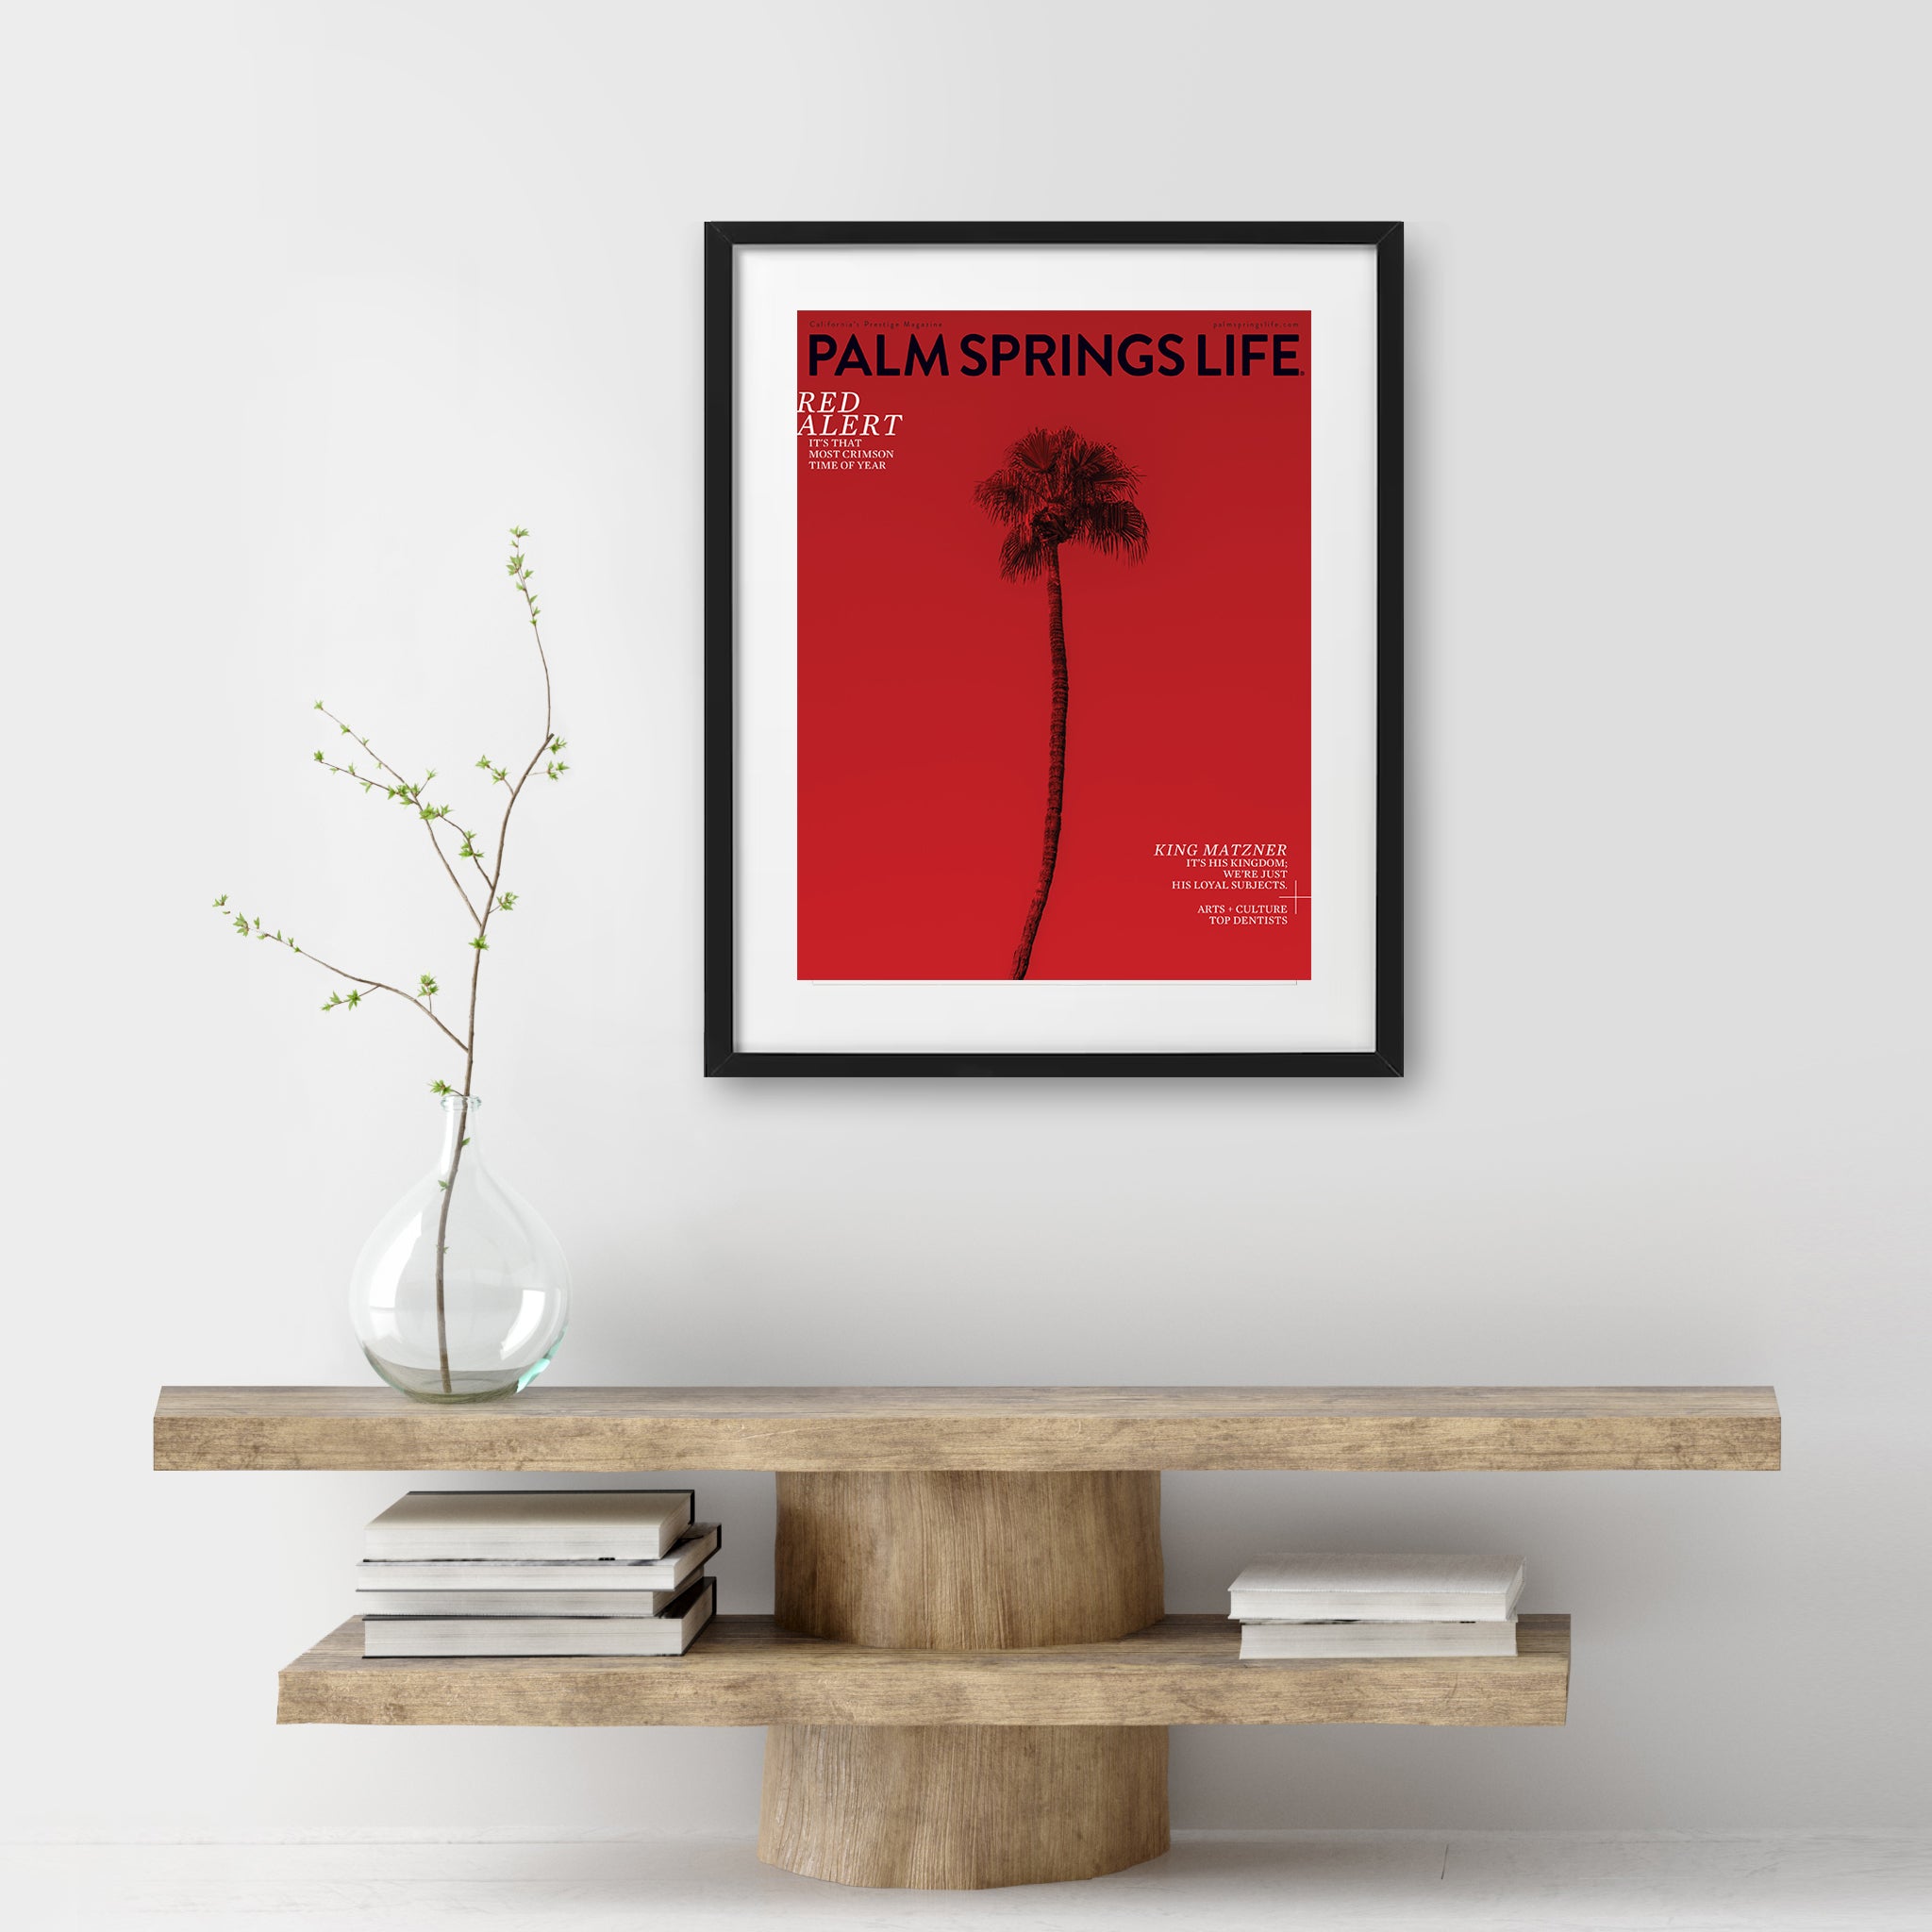 Palm Springs Life - December 2017 - Cover Poster